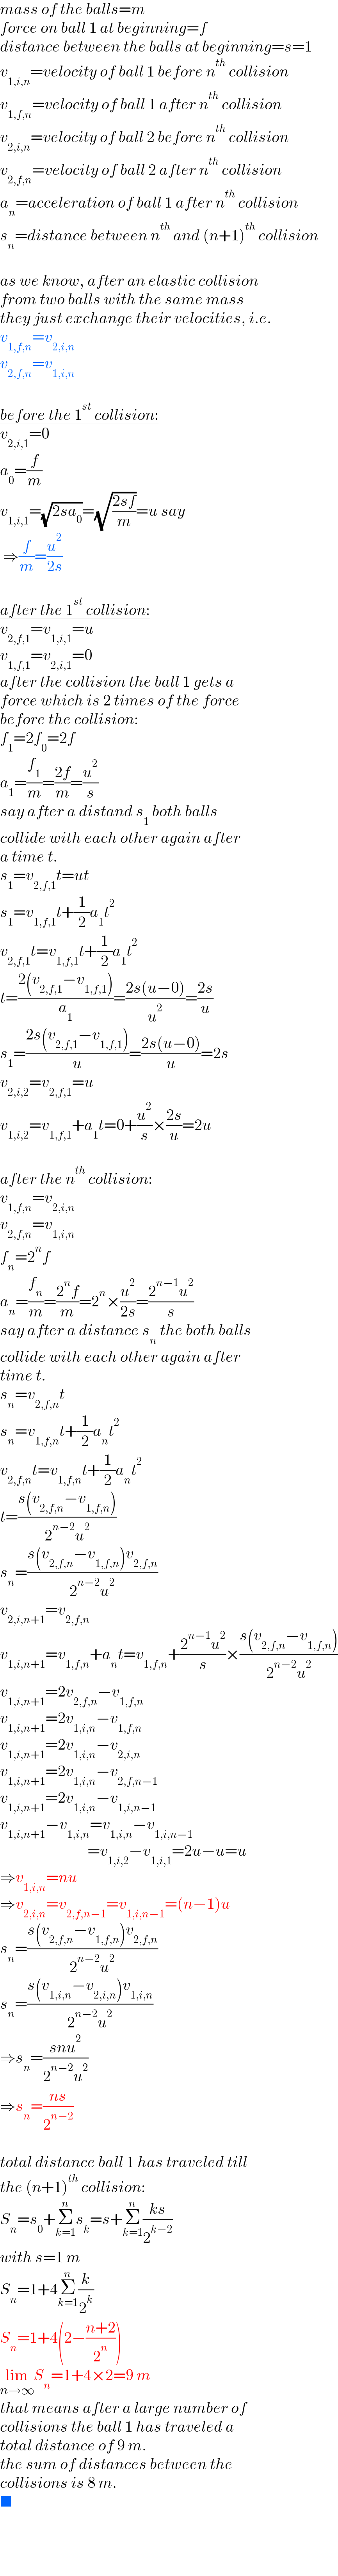 mass of the balls=m  force on ball 1 at beginning=f  distance between the balls at beginning=s=1  v_(1,i,n) =velocity of ball 1 before n^(th)  collision  v_(1,f,n) =velocity of ball 1 after n^(th)  collision  v_(2,i,n) =velocity of ball 2 before n^(th)  collision  v_(2,f,n) =velocity of ball 2 after n^(th)  collision  a_n =acceleration of ball 1 after n^(th)  collision  s_n =distance between n^(th)  and (n+1)^(th)  collision    as we know, after an elastic collision   from two balls with the same mass   they just exchange their velocities, i.e.  v_(1,f,n) =v_(2,i,n)   v_(2,f,n) =v_(1,i,n)     before the 1^(st)  collision:  v_(2,i,1) =0  a_0 =(f/m)  v_(1,i,1) =(√(2sa_0 ))=(√((2sf)/m))=u say   ⇒(f/m)=(u^2 /(2s))    after the 1^(st)  collision:  v_(2,f,1) =v_(1,i,1) =u  v_(1,f,1) =v_(2,i,1) =0  after the collision the ball 1 gets a  force which is 2 times of the force  before the collision:  f_1 =2f_0 =2f  a_1 =(f_1 /m)=((2f)/m)=(u^2 /s)  say after a distand s_1  both balls  collide with each other again after  a time t.  s_1 =v_(2,f,1) t=ut  s_1 =v_(1,f,1) t+(1/2)a_1 t^2   v_(2,f,1) t=v_(1,f,1) t+(1/2)a_1 t^2   t=((2(v_(2,f,1) −v_(1,f,1) ))/a_1 )=((2s(u−0))/u^2 )=((2s)/u)  s_1 =((2s(v_(2,f,1) −v_(1,f,1) ))/u)=((2s(u−0))/u)=2s  v_(2,i,2) =v_(2,f,1) =u  v_(1,i,2) =v_(1,f,1) +a_1 t=0+(u^2 /s)×((2s)/u)=2u    after the n^(th)  collision:  v_(1,f,n) =v_(2,i,n)   v_(2,f,n) =v_(1,i,n)   f_n =2^n f  a_n =(f_n /m)=((2^n f)/m)=2^n ×(u^2 /(2s))=((2^(n−1) u^2 )/s)  say after a distance s_n  the both balls  collide with each other again after  time t.  s_n =v_(2,f,n) t  s_n =v_(1,f,n) t+(1/2)a_n t^2   v_(2,f,n) t=v_(1,f,n) t+(1/2)a_n t^2   t=((s(v_(2,f,n) −v_(1,f,n) ))/(2^(n−2) u^2 ))  s_n =((s(v_(2,f,n) −v_(1,f,n) )v_(2,f,n) )/(2^(n−2) u^2 ))  v_(2,i,n+1) =v_(2,f,n)   v_(1,i,n+1) =v_(1,f,n) +a_n t=v_(1,f,n) +((2^(n−1) u^2 )/s)×((s(v_(2,f,n) −v_(1,f,n) ))/(2^(n−2) u^2 ))  v_(1,i,n+1) =2v_(2,f,n) −v_(1,f,n)   v_(1,i,n+1) =2v_(1,i,n) −v_(1,f,n)   v_(1,i,n+1) =2v_(1,i,n) −v_(2,i,n)   v_(1,i,n+1) =2v_(1,i,n) −v_(2,f,n−1)   v_(1,i,n+1) =2v_(1,i,n) −v_(1,i,n−1)   v_(1,i,n+1) −v_(1,i,n) =v_(1,i,n) −v_(1,i,n−1)                               =v_(1,i,2) −v_(1,i,1) =2u−u=u  ⇒v_(1,i,n) =nu  ⇒v_(2,i,n) =v_(2,f,n−1) =v_(1,i,n−1) =(n−1)u  s_n =((s(v_(2,f,n) −v_(1,f,n) )v_(2,f,n) )/(2^(n−2) u^2 ))  s_n =((s(v_(1,i,n) −v_(2,i,n) )v_(1,i,n) )/(2^(n−2) u^2 ))  ⇒s_n =((snu^2 )/(2^(n−2) u^2 ))  ⇒s_n =((ns)/2^(n−2) )    total distance ball 1 has traveled till  the (n+1)^(th)  collision:  S_n =s_0 +Σ_(k=1) ^n s_k =s+Σ_(k=1) ^n ((ks)/2^(k−2) )  with s=1 m  S_n =1+4Σ_(k=1) ^n (k/2^k )  S_n =1+4(2−((n+2)/2^n ))  lim_(n→∞) S_n =1+4×2=9 m   that means after a large number of  collisions the ball 1 has traveled a   total distance of 9 m.  the sum of distances between the  collisions is 8 m.  ■  